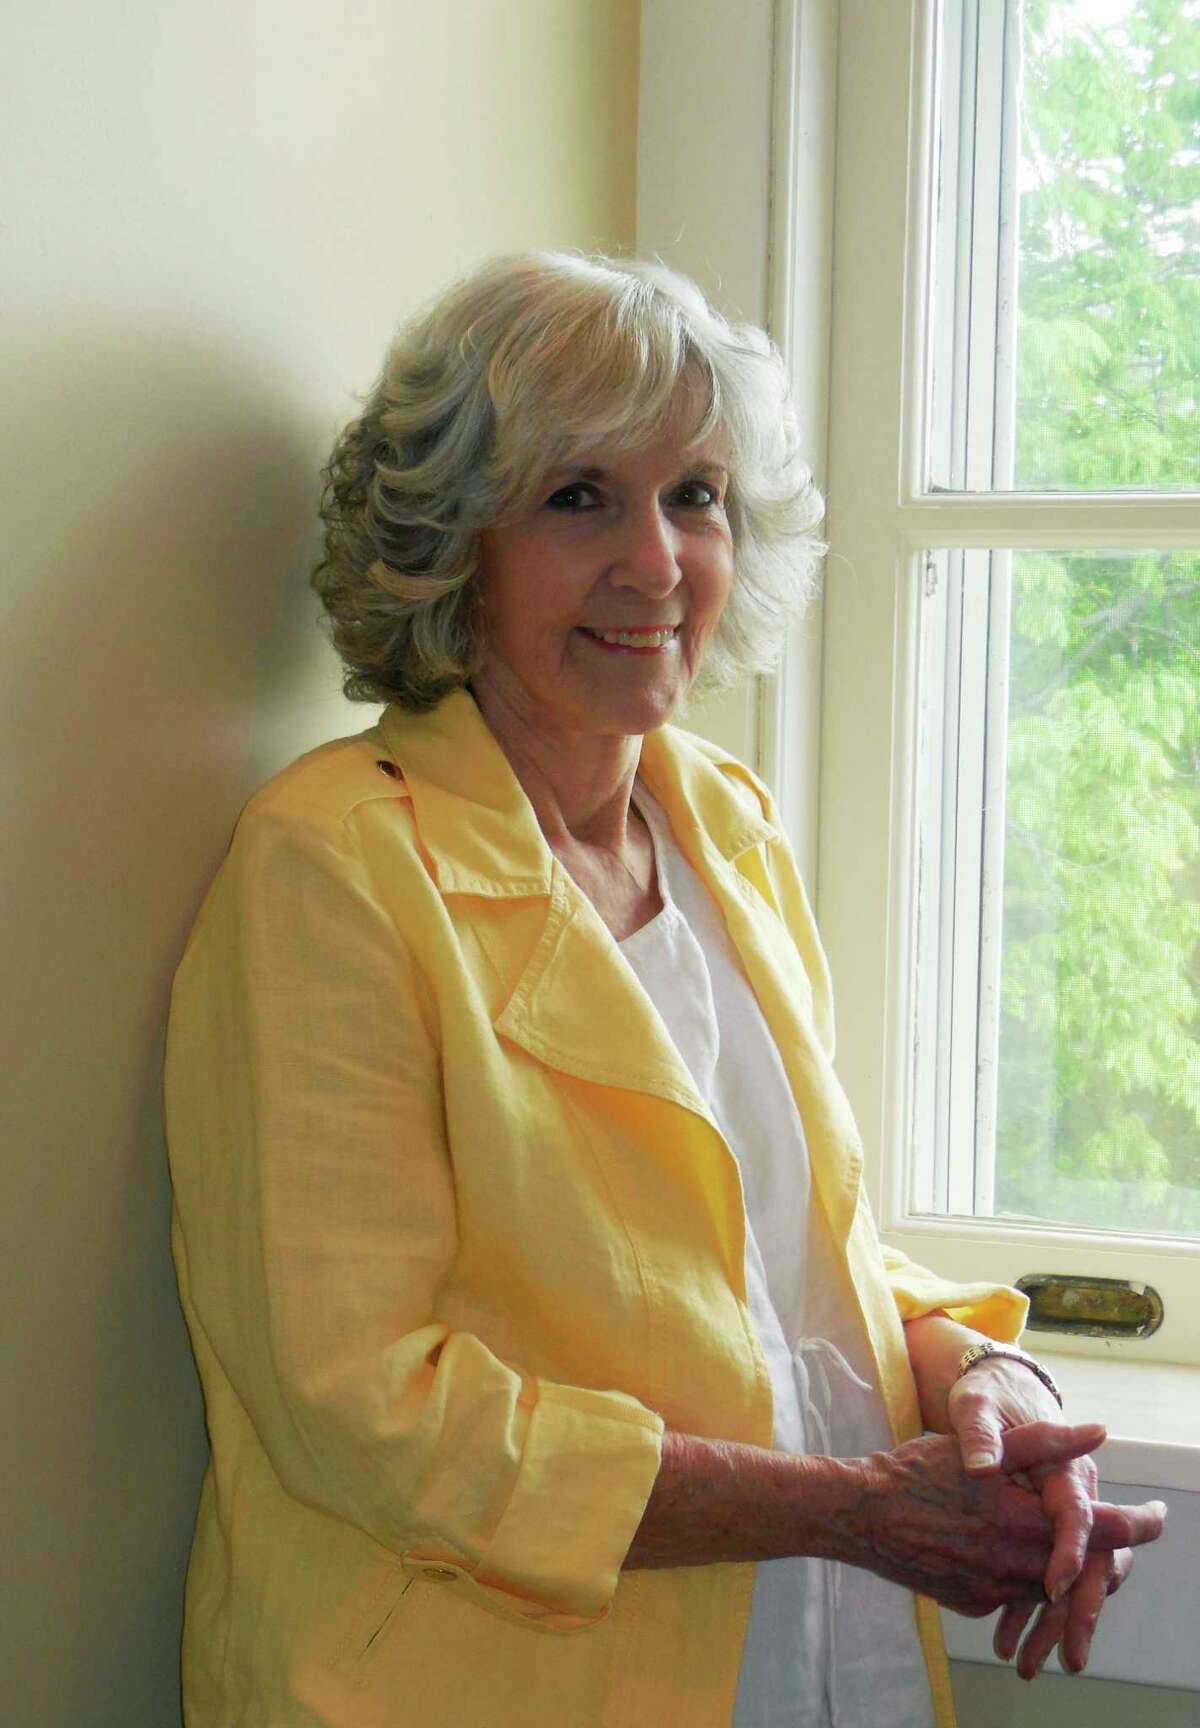 Sue Grafton, 1940-2017: Sue Grafton, author of the best-selling “alphabet series” of mystery novels, died in Santa Barbara, Calif. on Thursday, Dec. 28, 2017. She was 77.